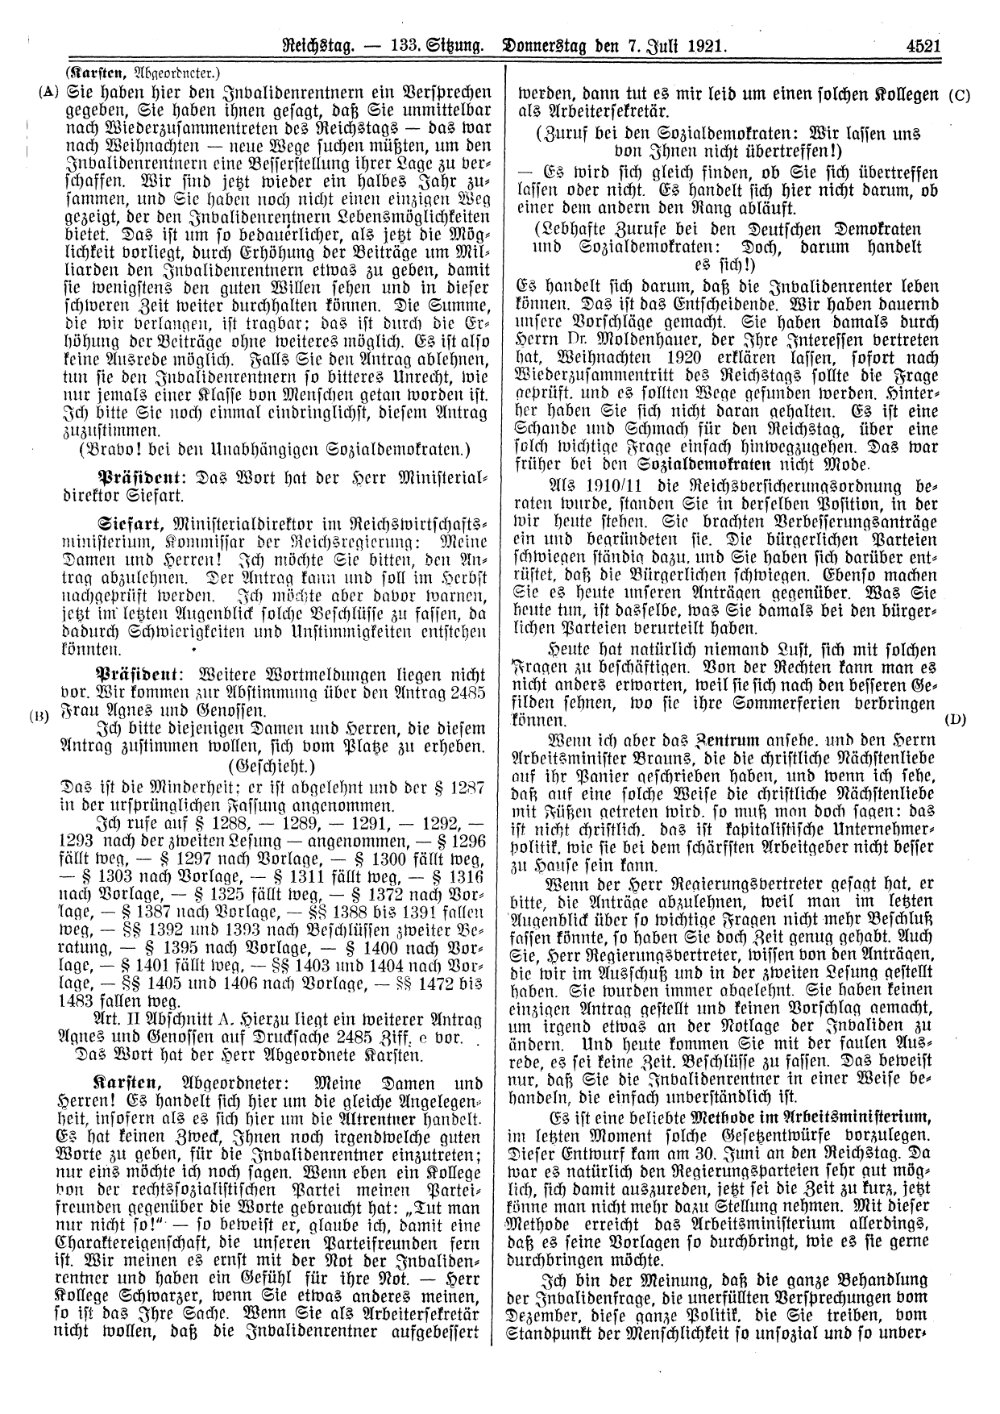 Scan of page 4521